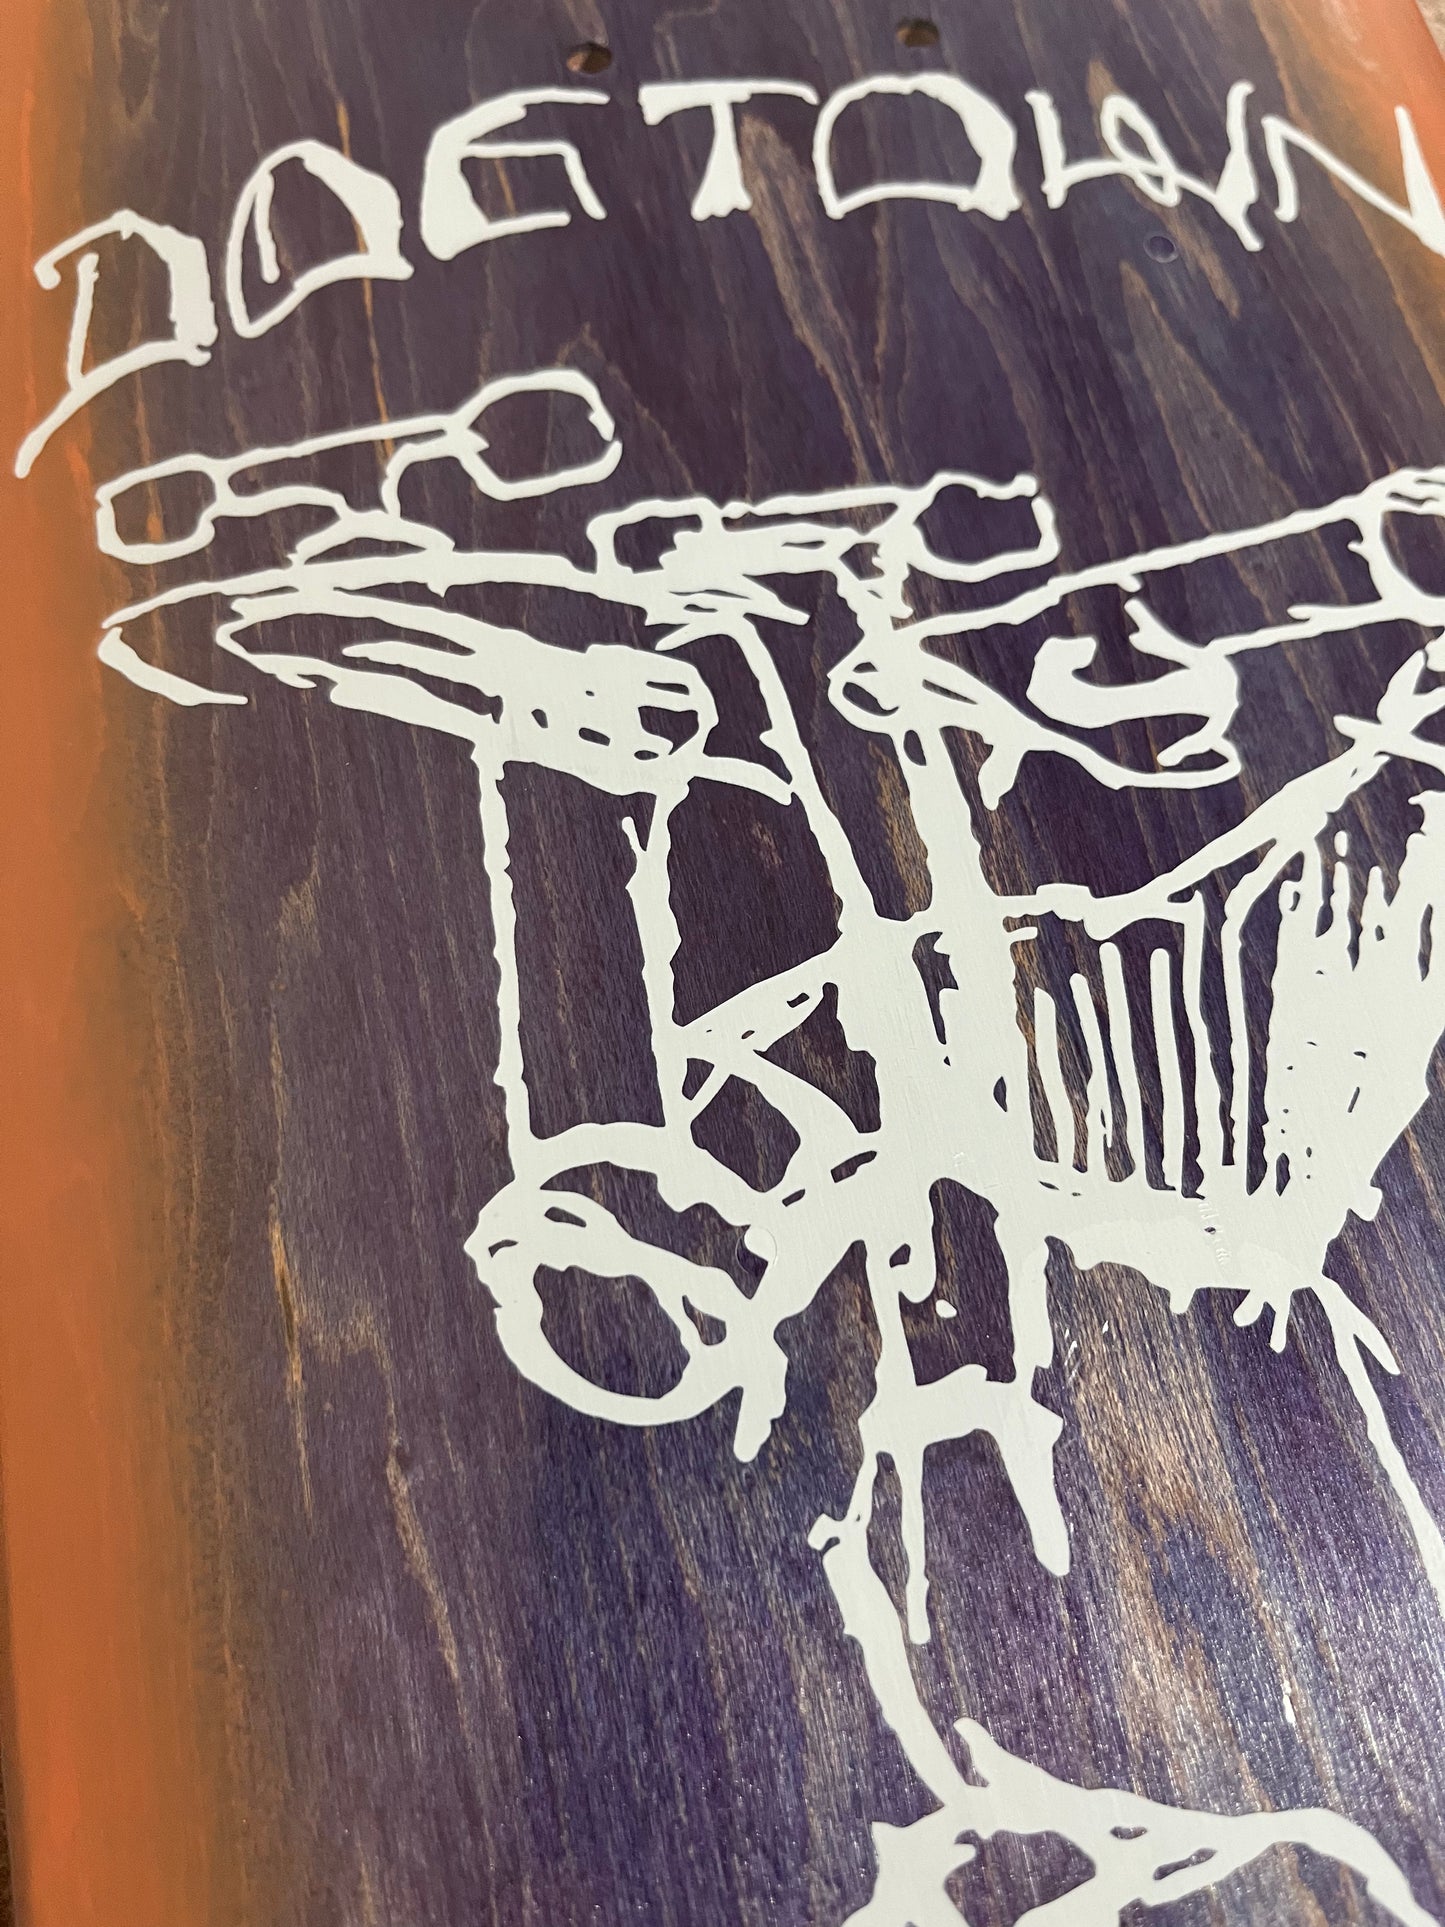 Dogtown Curb Plant Street Deck (Art by Mark Gonzales) 8.0" x 31.45"